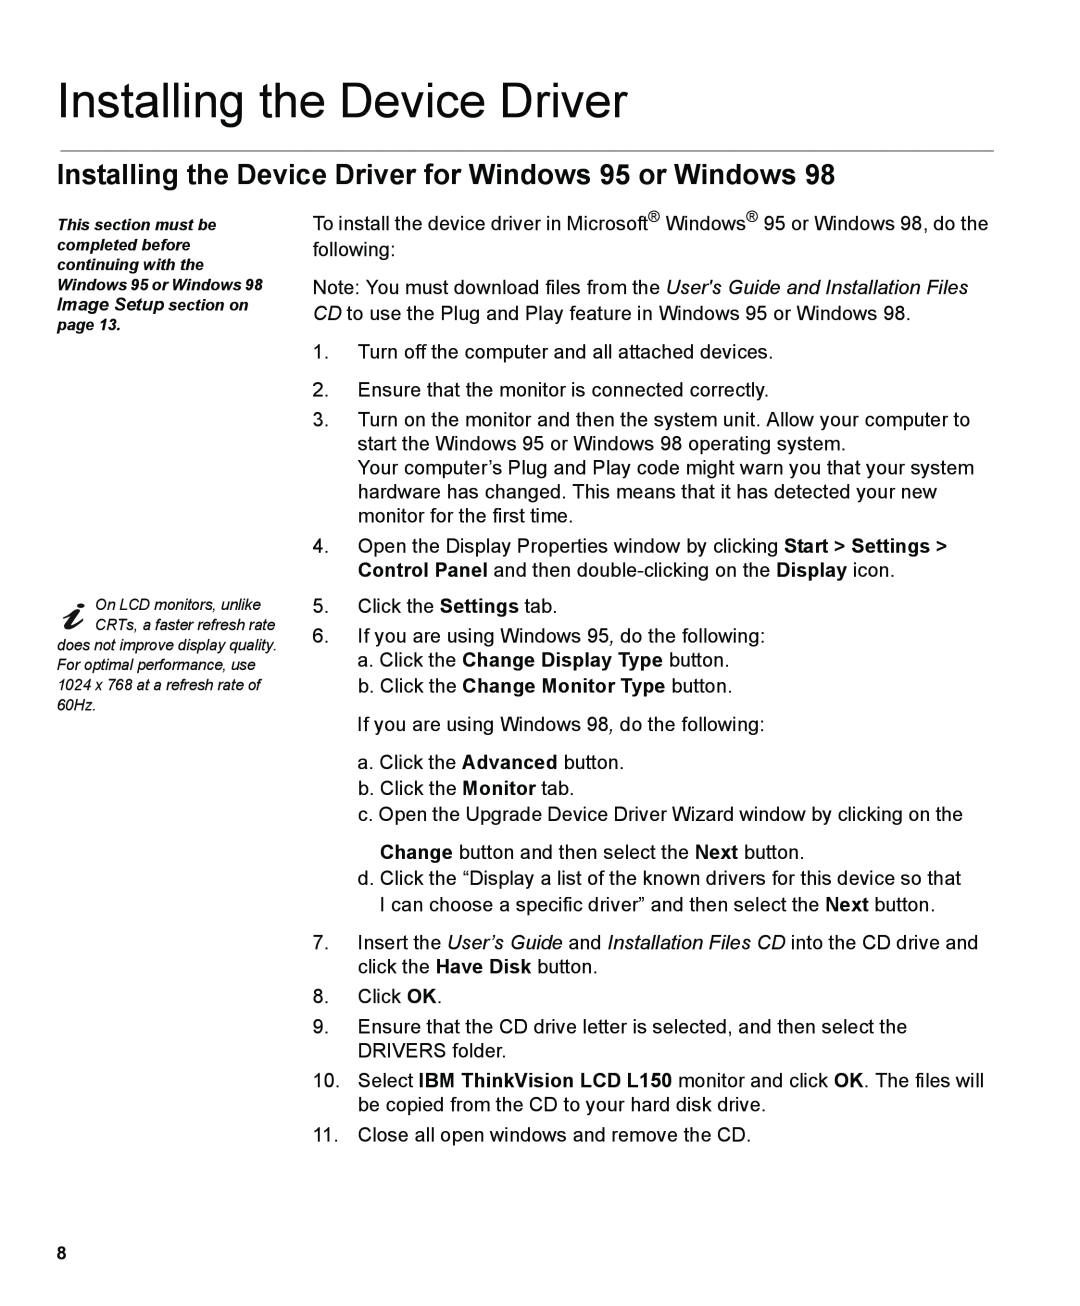 IBM L150 manual Installing the Device Driver for Windows 95 or Windows, a. Click the Change Display Type button 